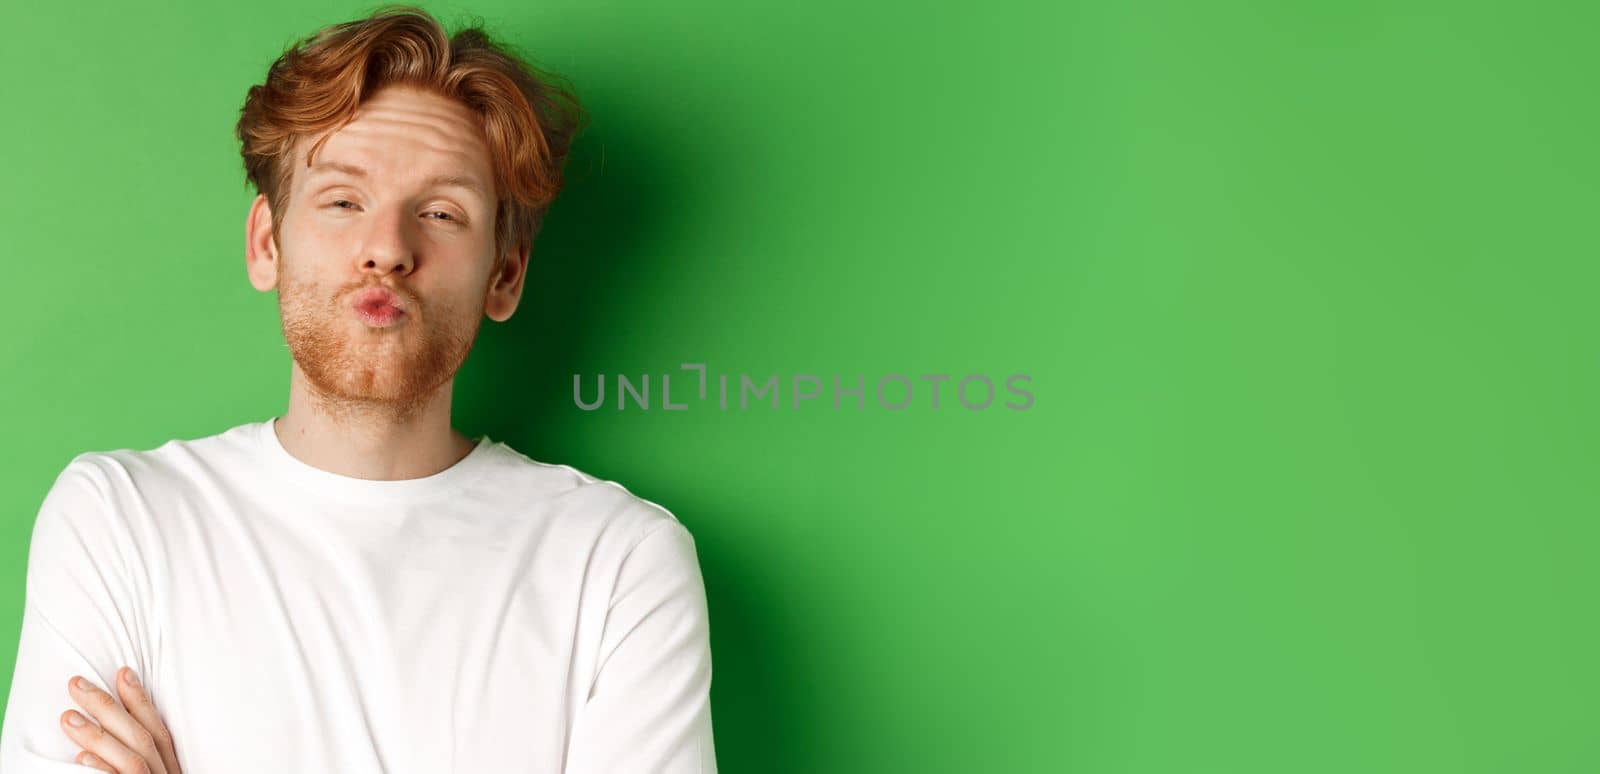 Emotions and fashion concept. Silly redhead guy with beard pucker lips and leaning for kiss, standing over green background.